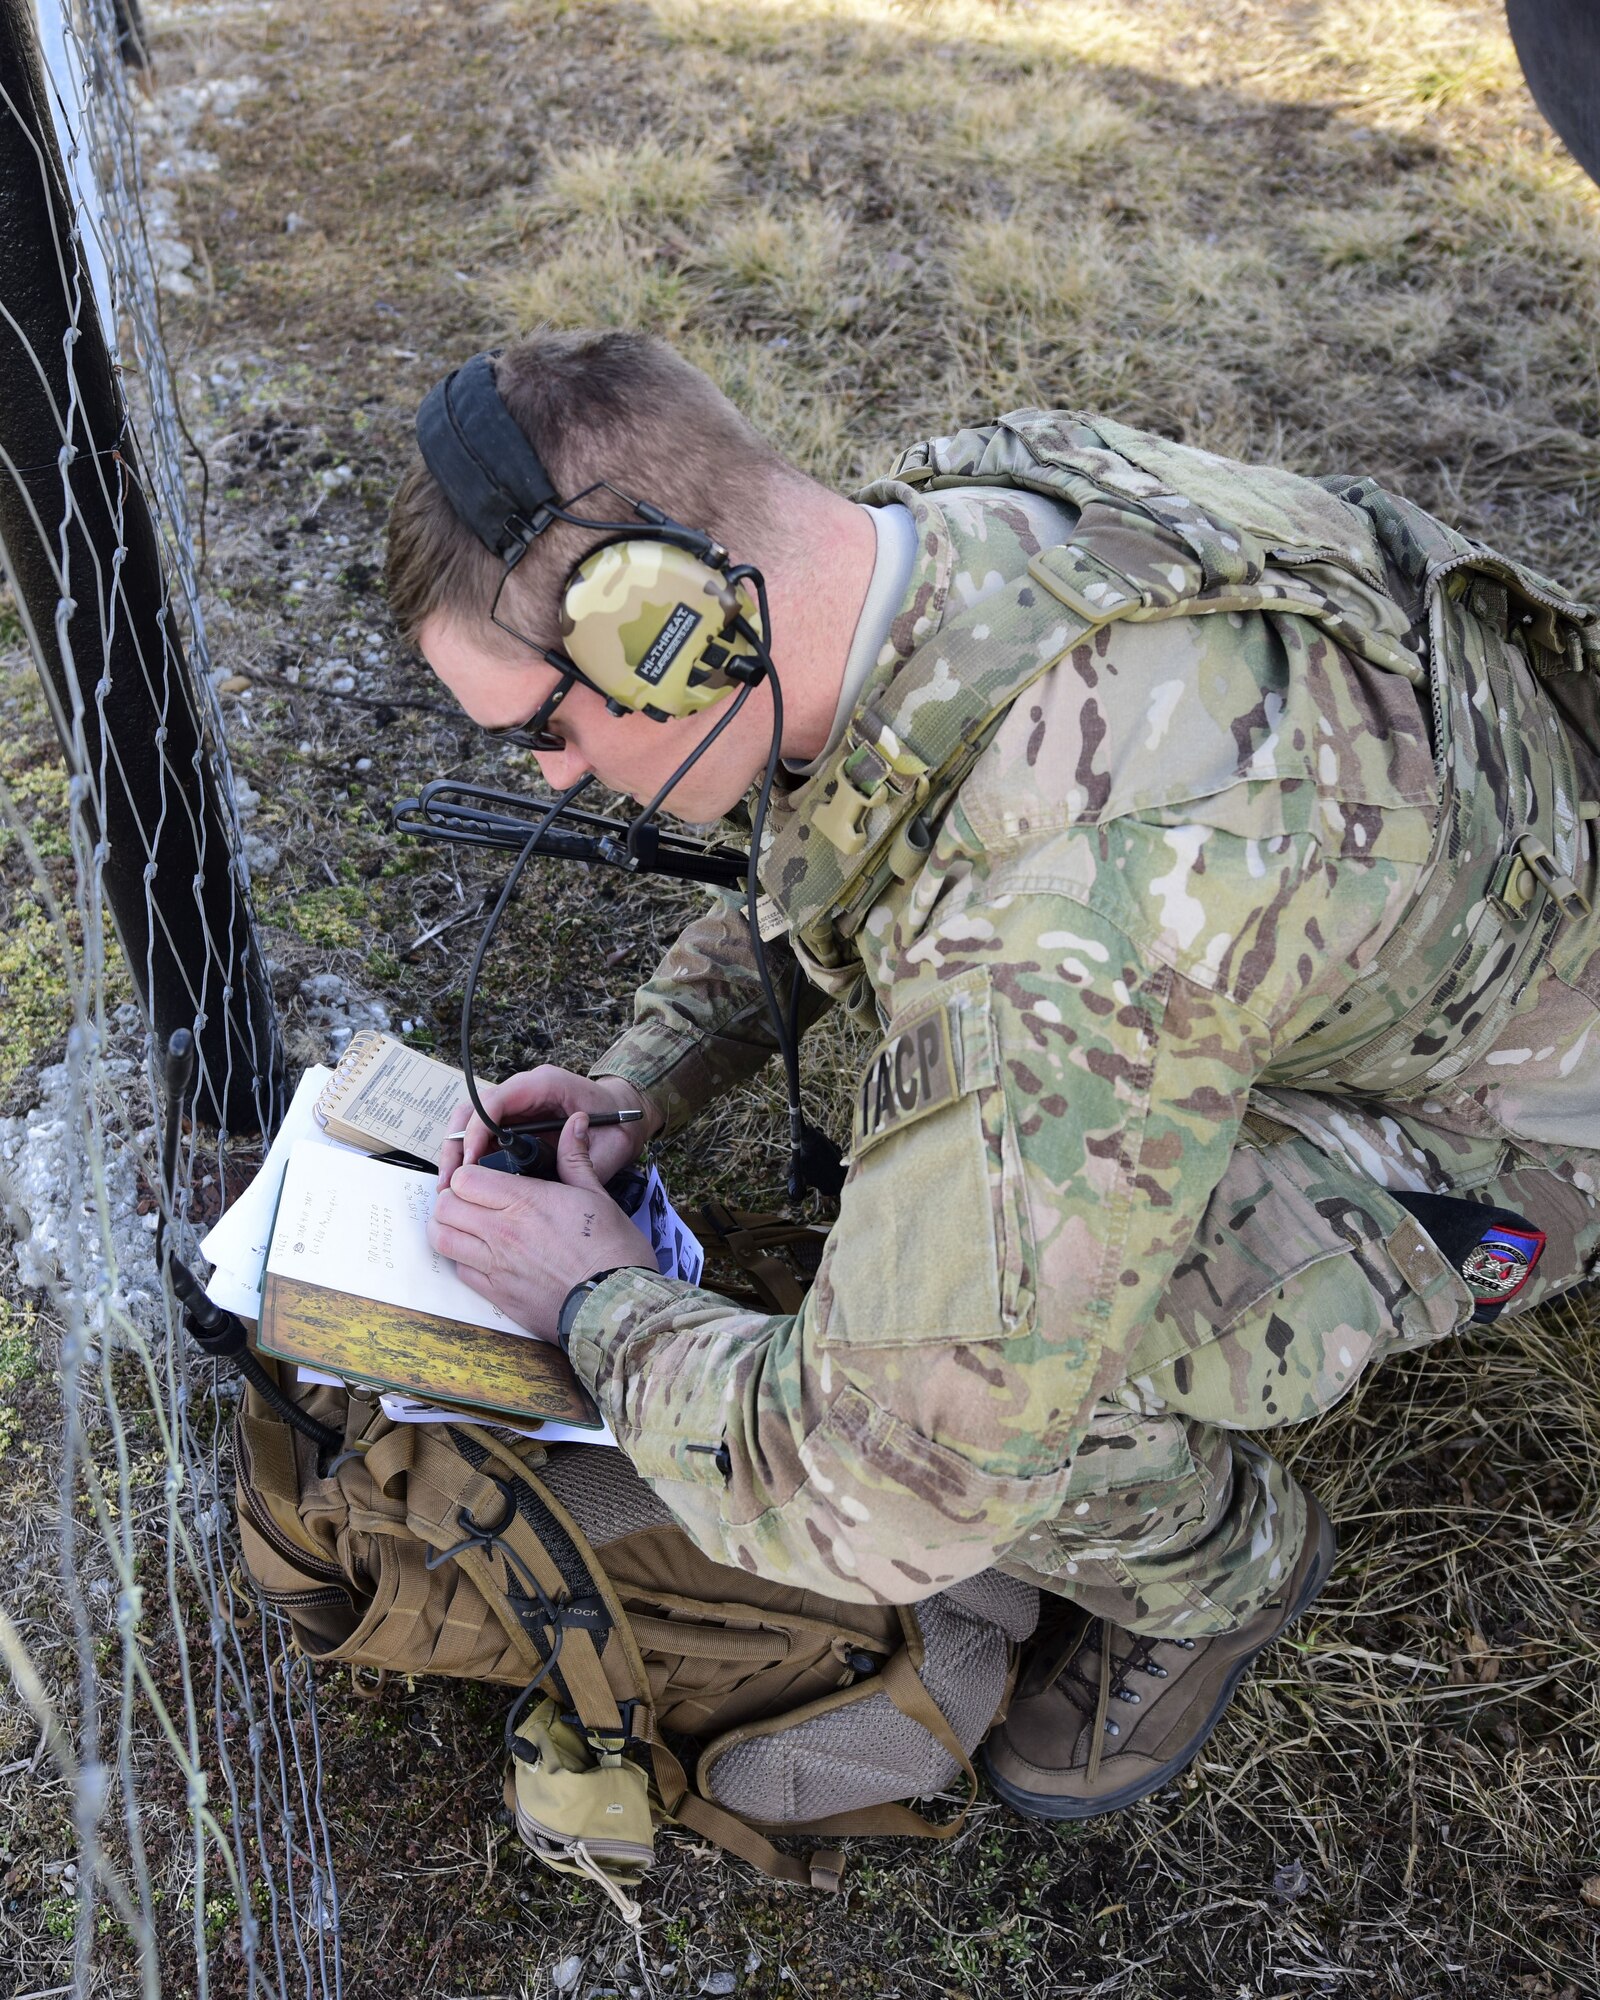 A Joint Terminal Attack Controller from the 7th Air Support Operations Squadron, located in Fort Bliss, Texas, writes down information during a joint training at Warshaw, Mo., Jan. 31, 2018. JTACs are personnel who are authorized to call airstrikes and help coordinate close-air-support missions. (U.S. Air Force by Staff Sgt. Danielle Quilla)